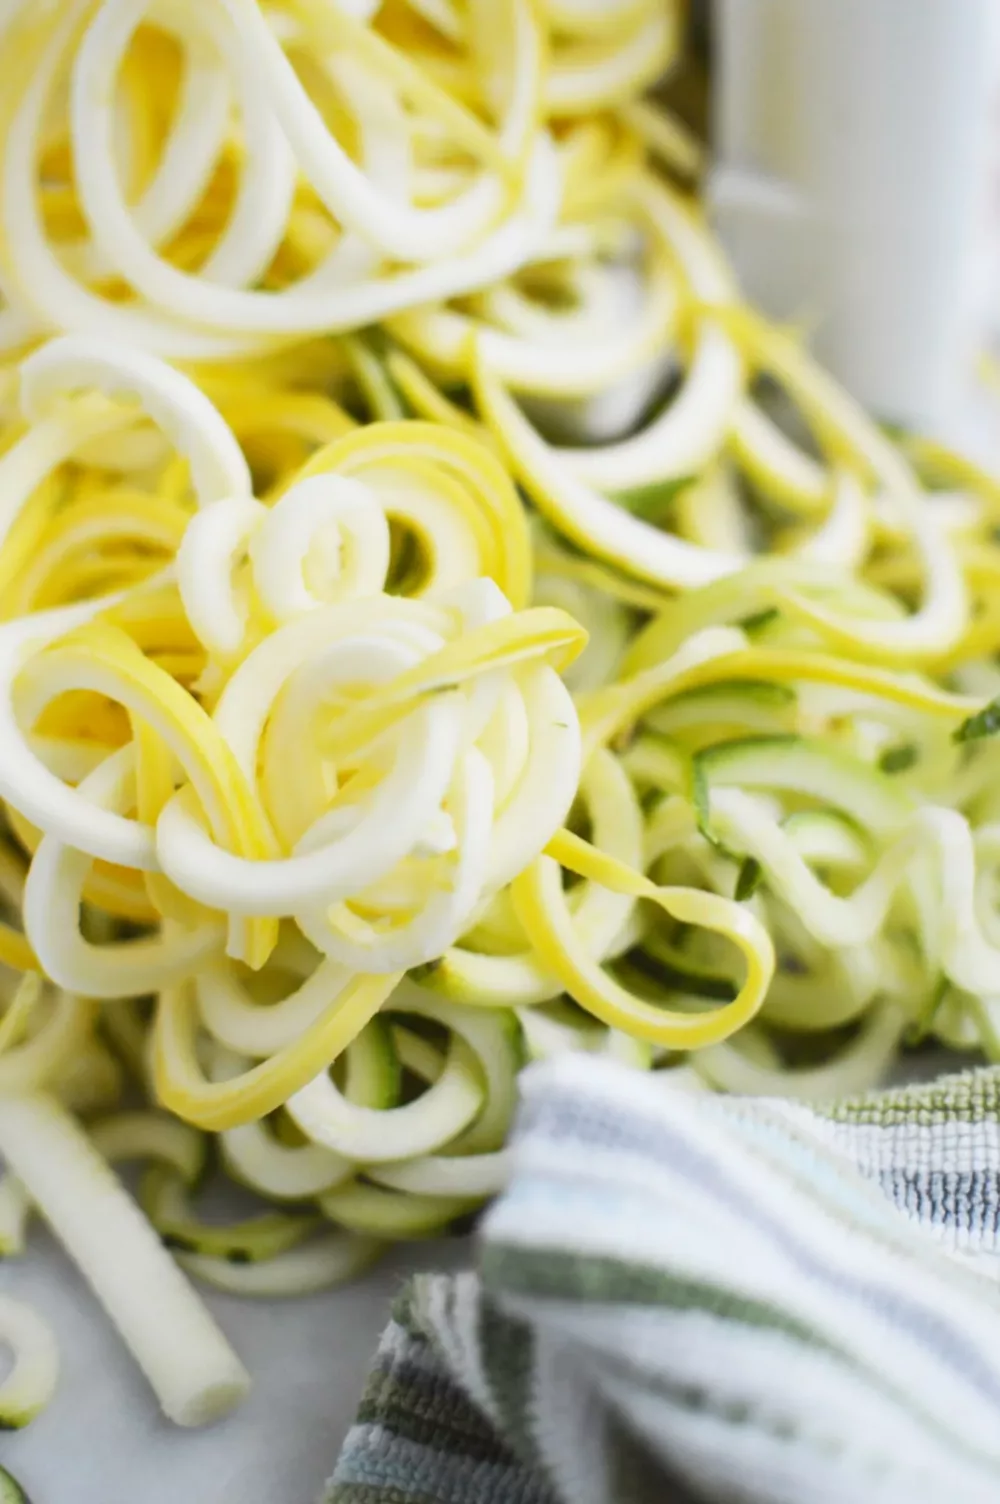 spirals made from zucchini and squash